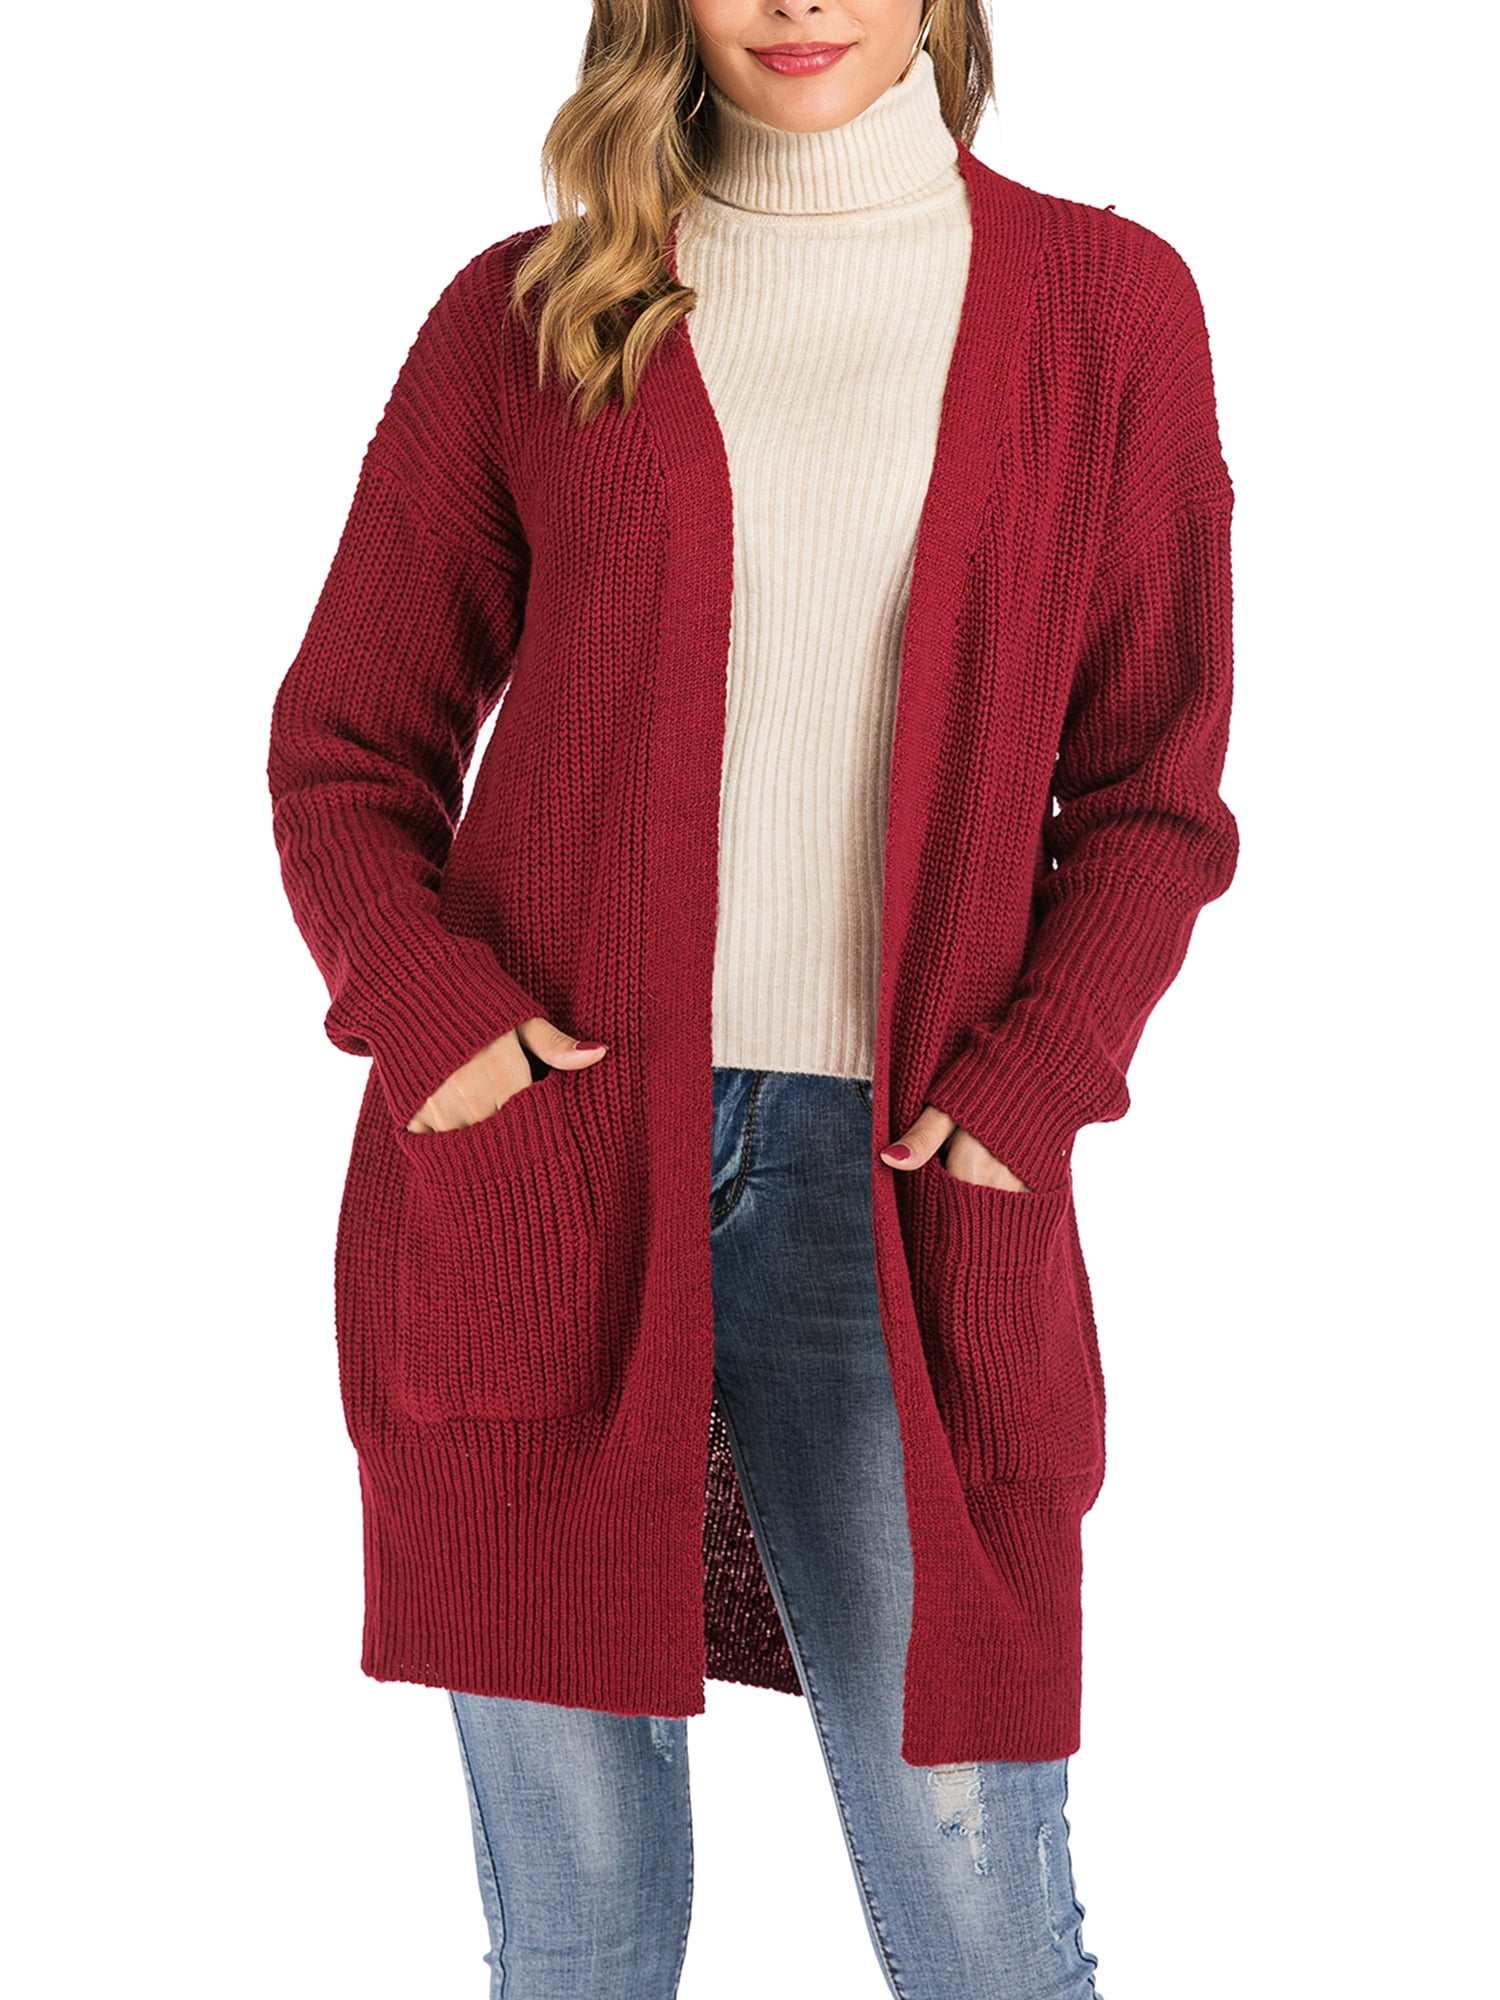 Women's Open Front Duster Cardigan Long Sleeve Thin Sweater Loose ...